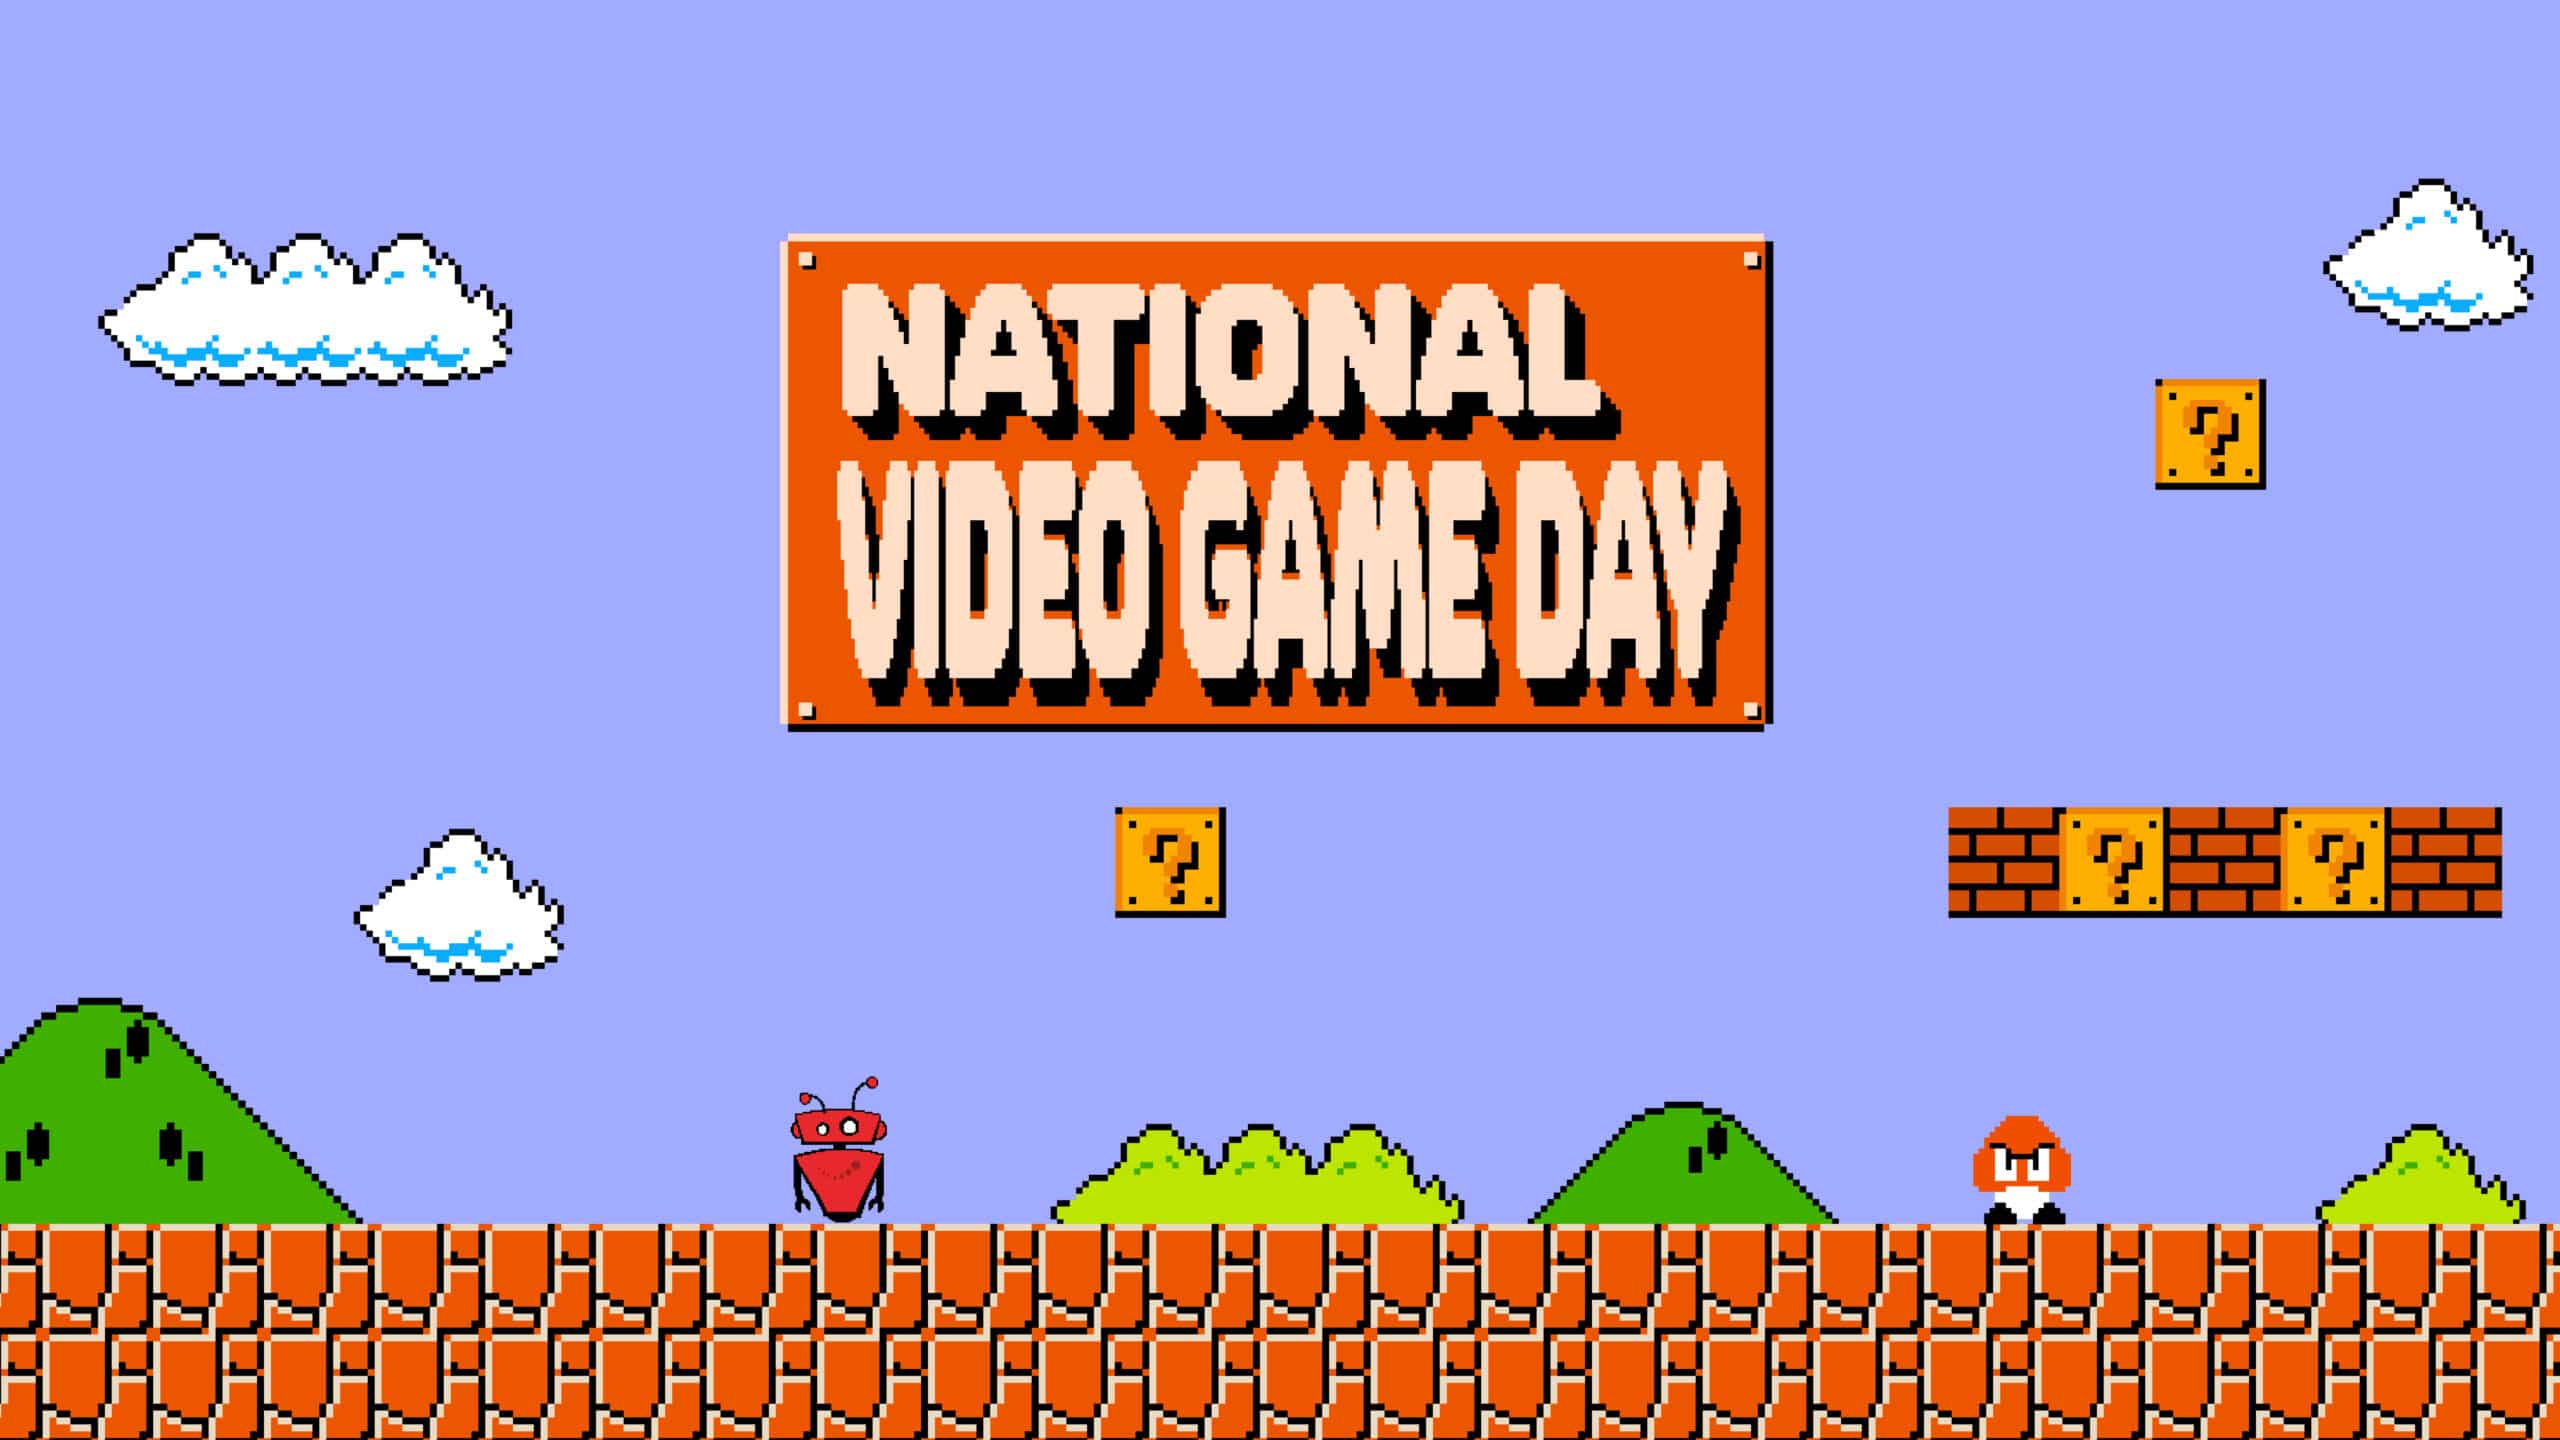 xbert in the super mario universe for national video game day